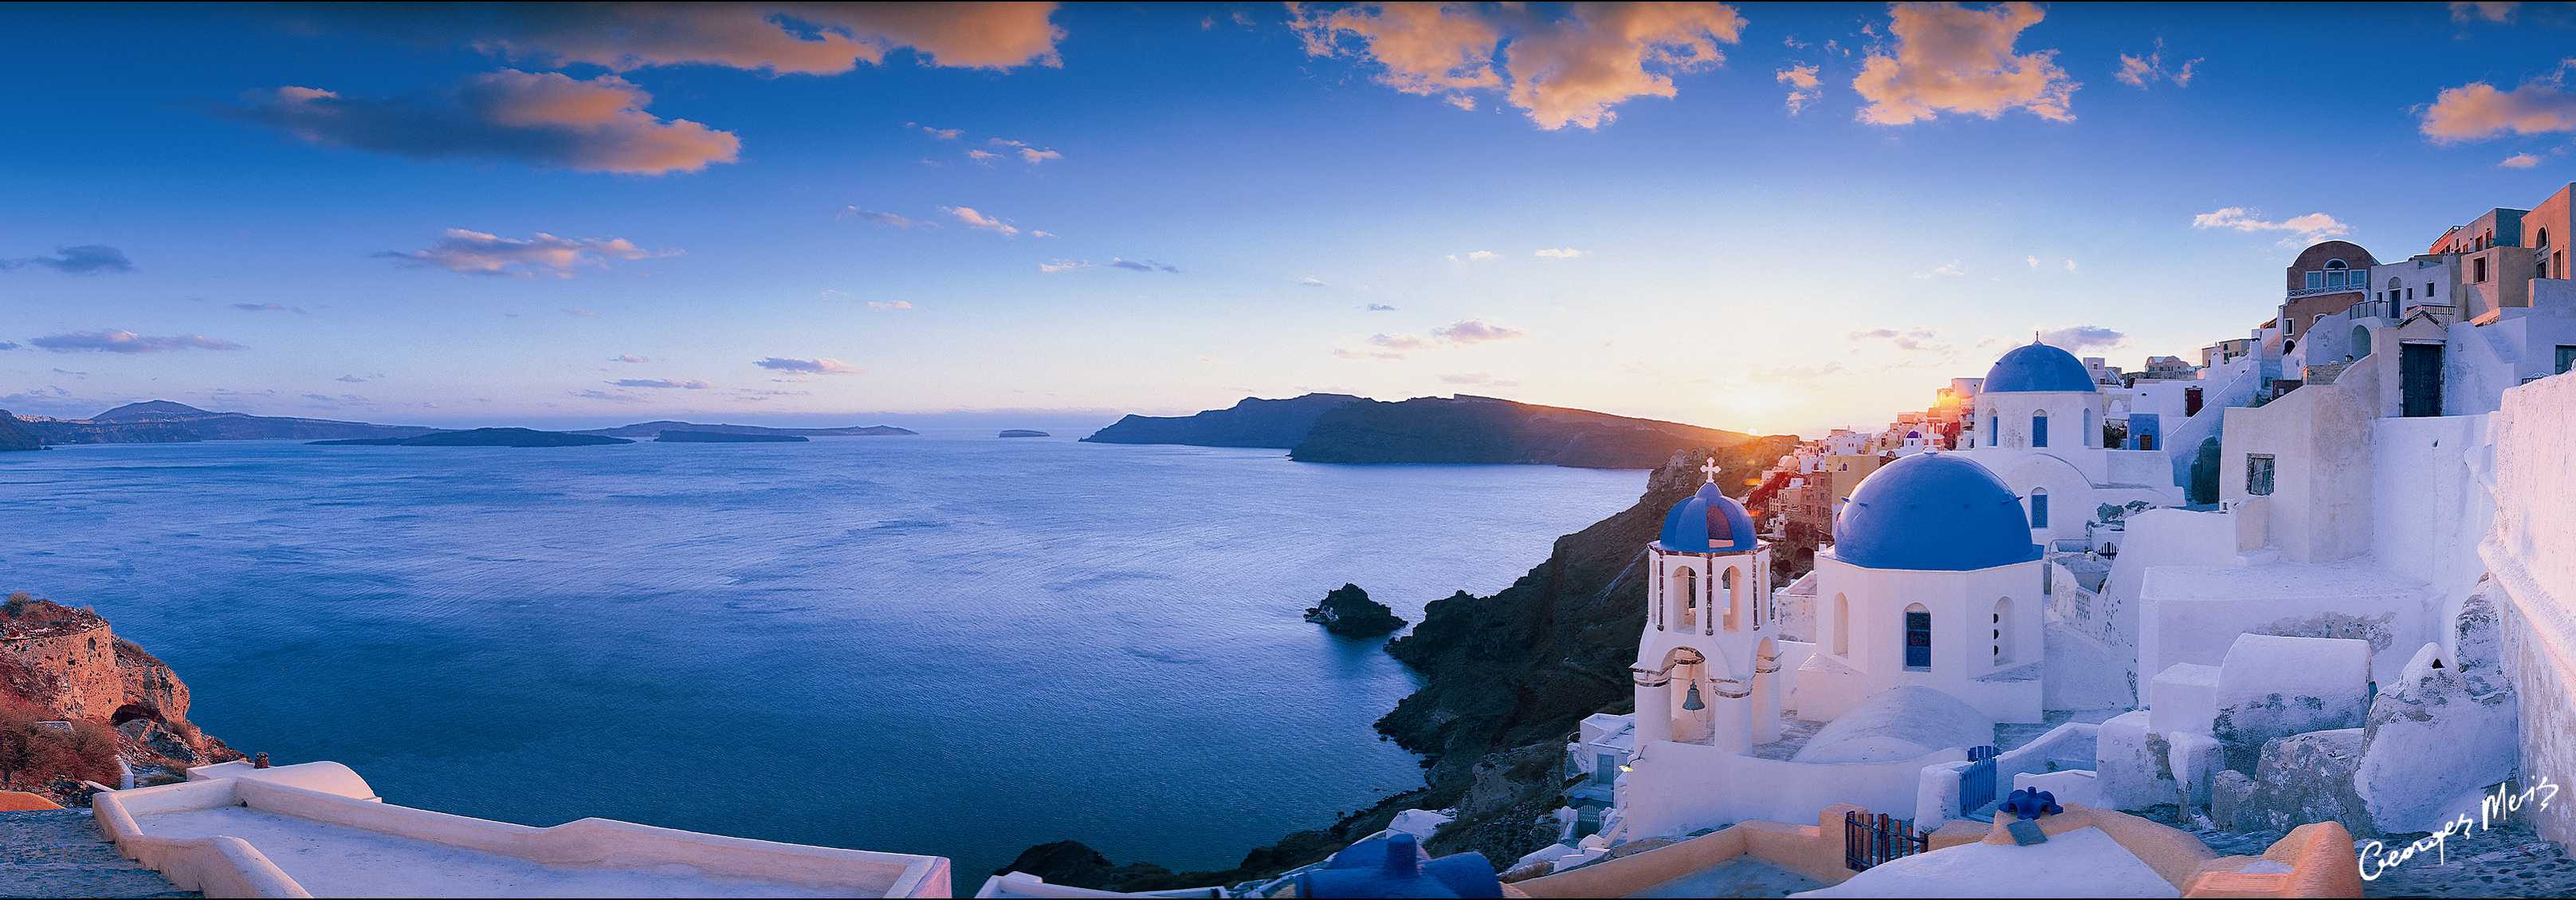  To See The Sunset In Santorini Greece [35 HQ Photos]   The Roosevelts